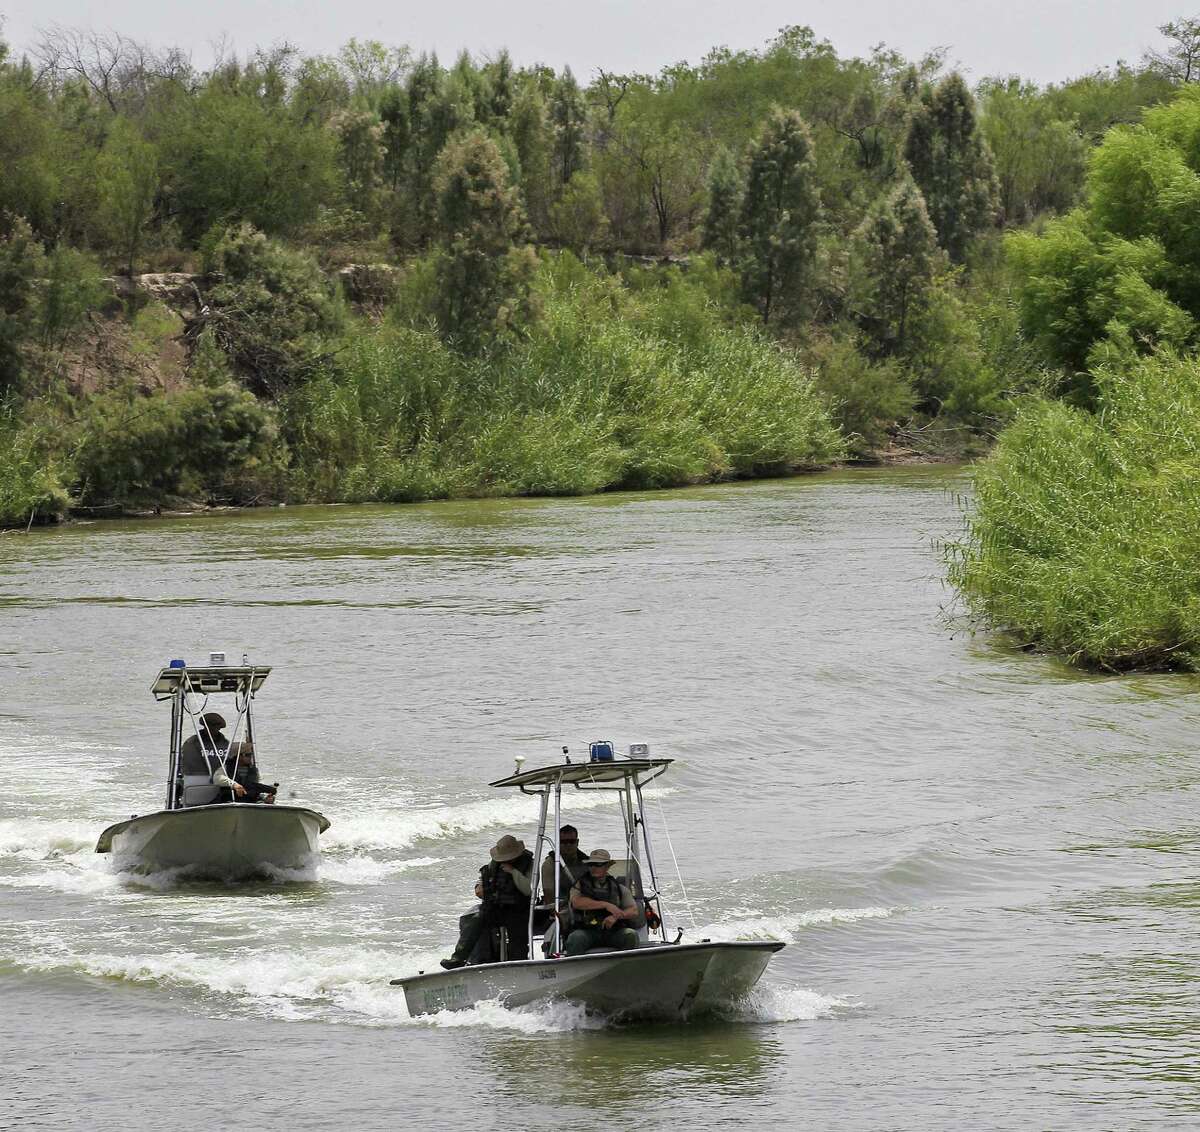 U.S. Border Patrol boats ride the Rio Grande by the McAllen pump in Hidalgo, County, Texas, Thursday, July 24, 2014. It is part of the Rio Grande Sector, an area that has seen an increase of unaccompanied minor Central American immigrants crossing in recent months. According to sector Chief Border Patrol Agent Kevin W. Oaks, his sector currently has 3,234 agents, and 191 support staff. In the past 18 months, they have added 500 new agents, and will add roughly 300 more through the end of this year.